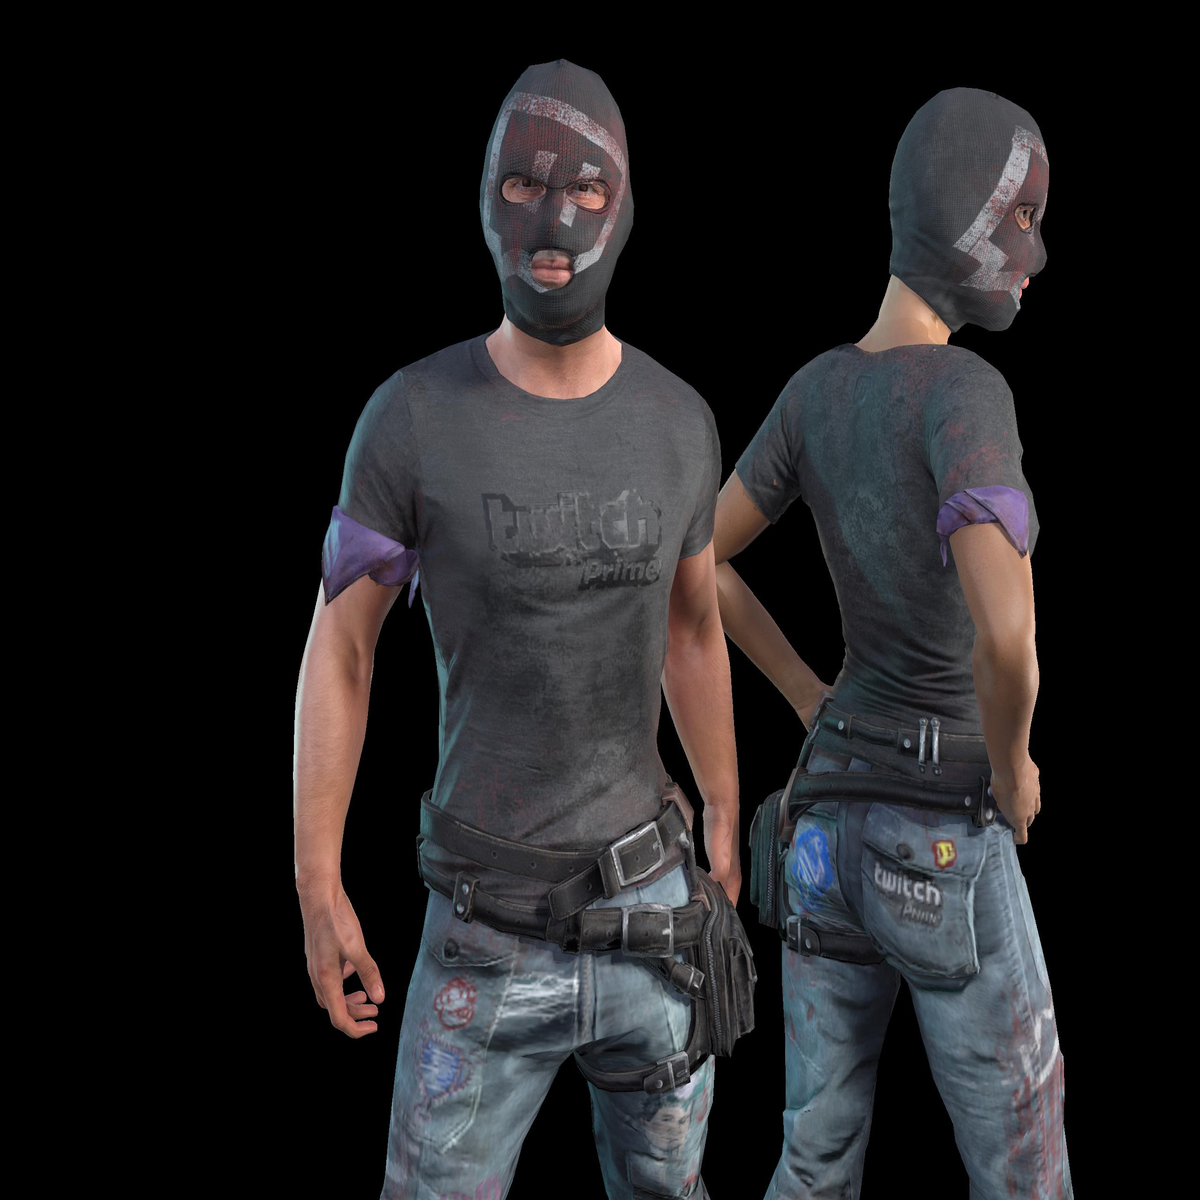 Twitch Prime goes global with exclusive gear in PLAYERUNKNOWN'S